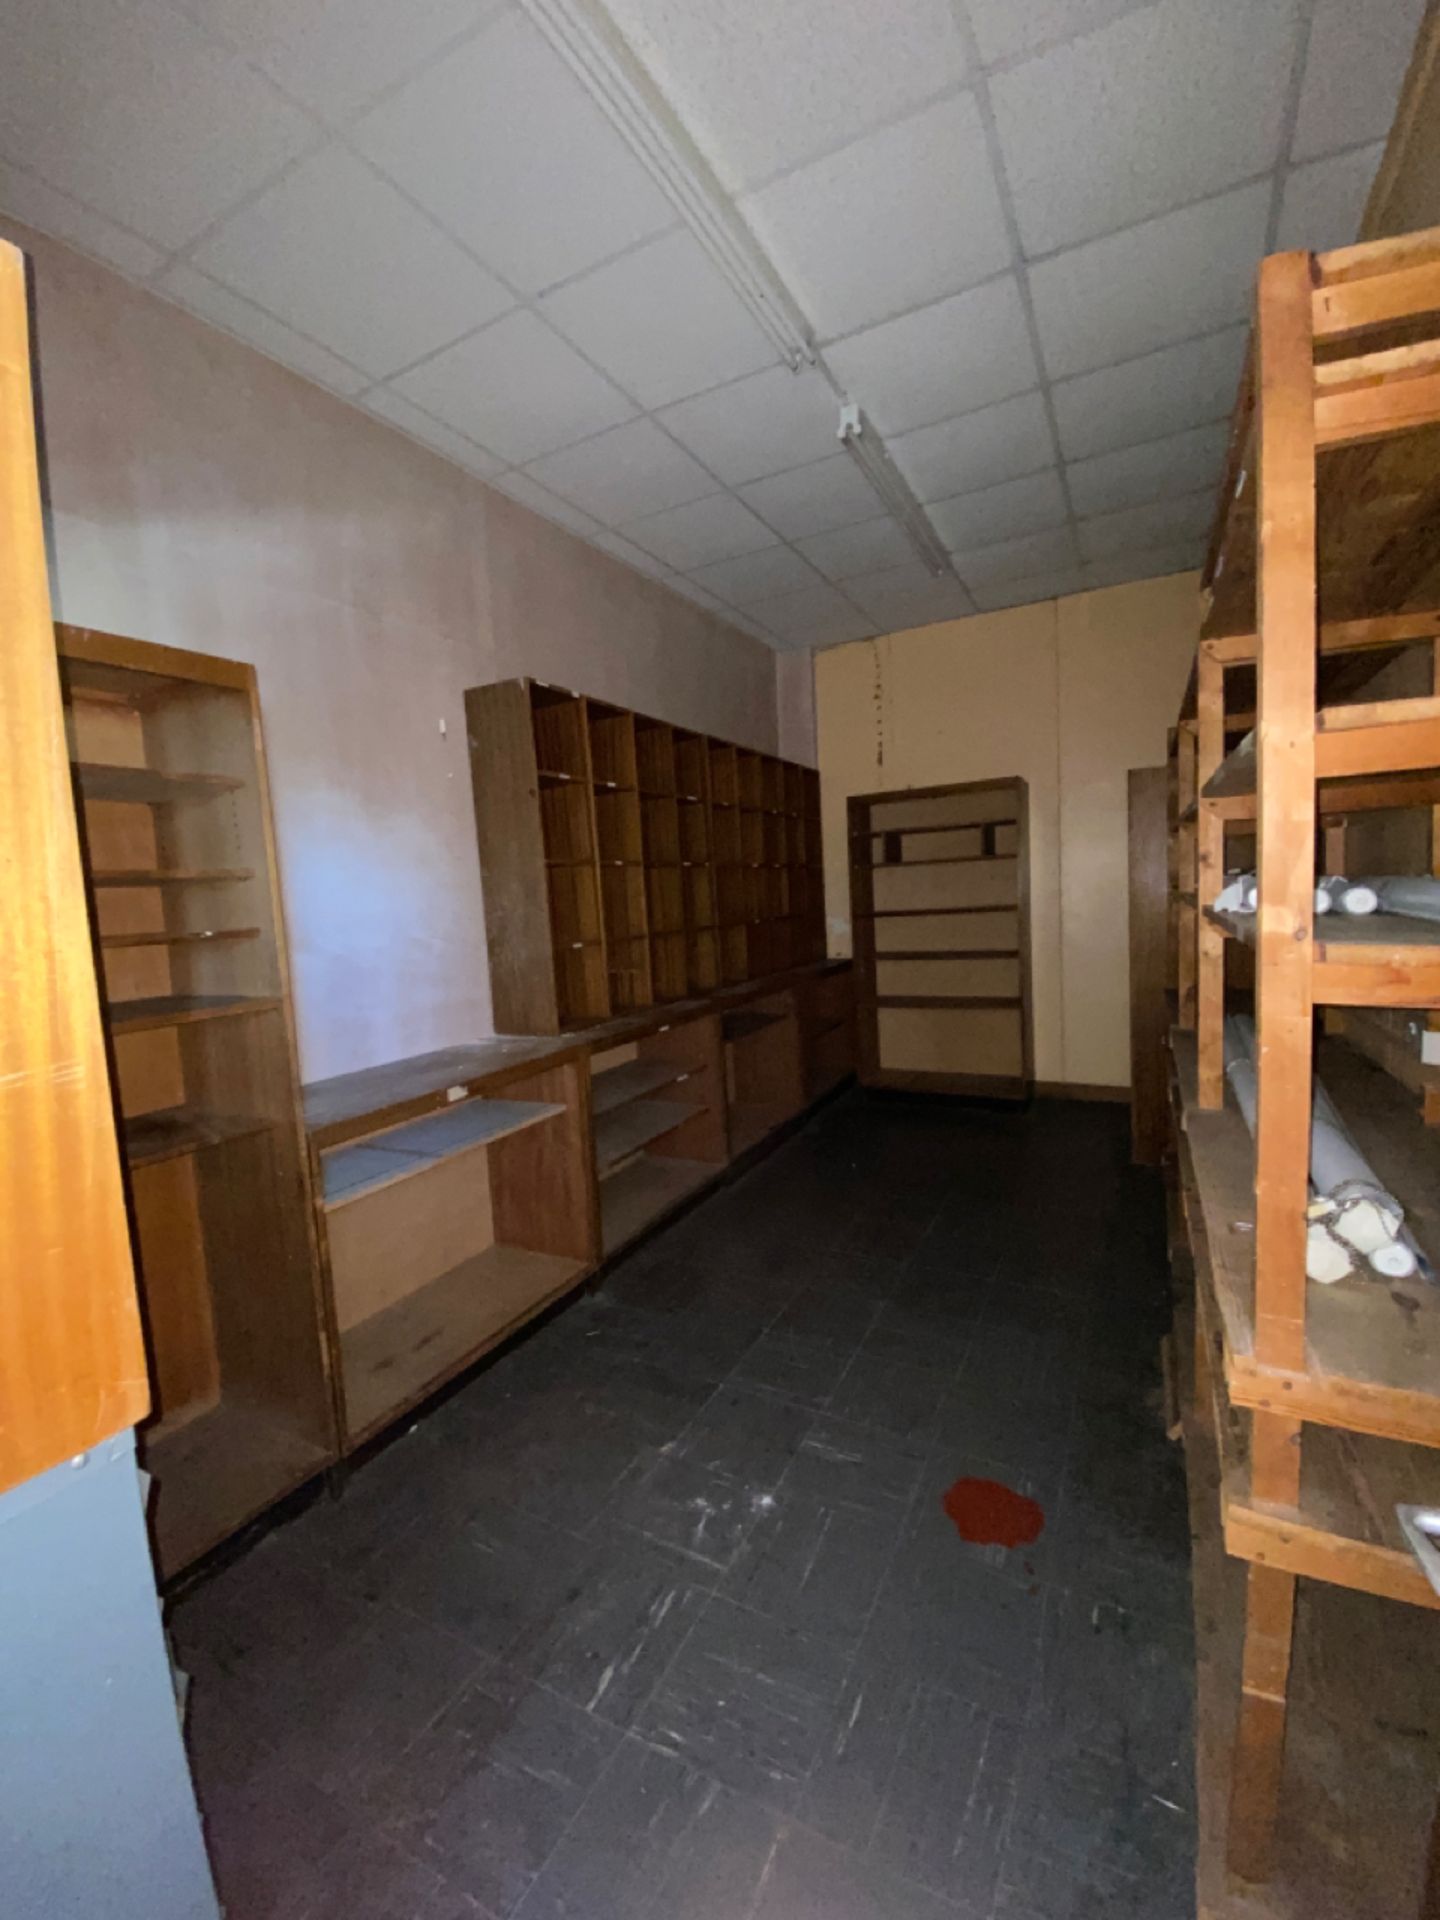 Entire Contents Of Science Room 205 - Image 8 of 10